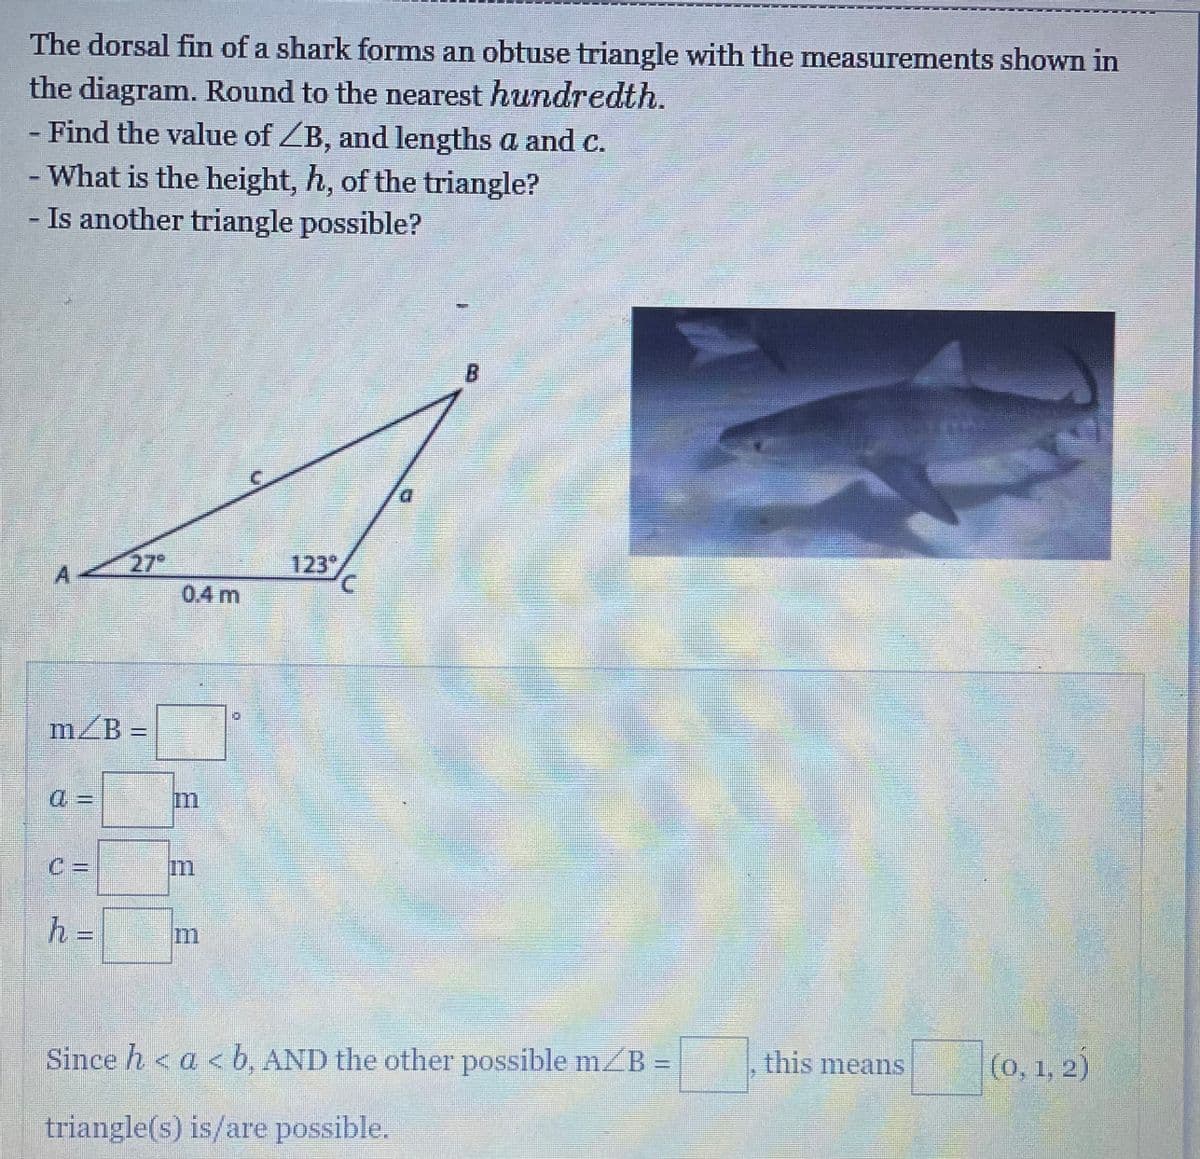 The dorsal fin of a shark forms an obtuse triangle with the measurements shown in
the diagram. Round to the nearest hundredth.
- Find the value of ZB, and lengths a and c.
- What is the height, h, of the triangle?
Is another triangle possible?
27
0.4 m
123°,
m/B =
%3D
C =
m
h%3=
m
Since h < a < b, AND the other possible m/B =
this means
(0, 1, 2)
triangle(s) is/are possible.
